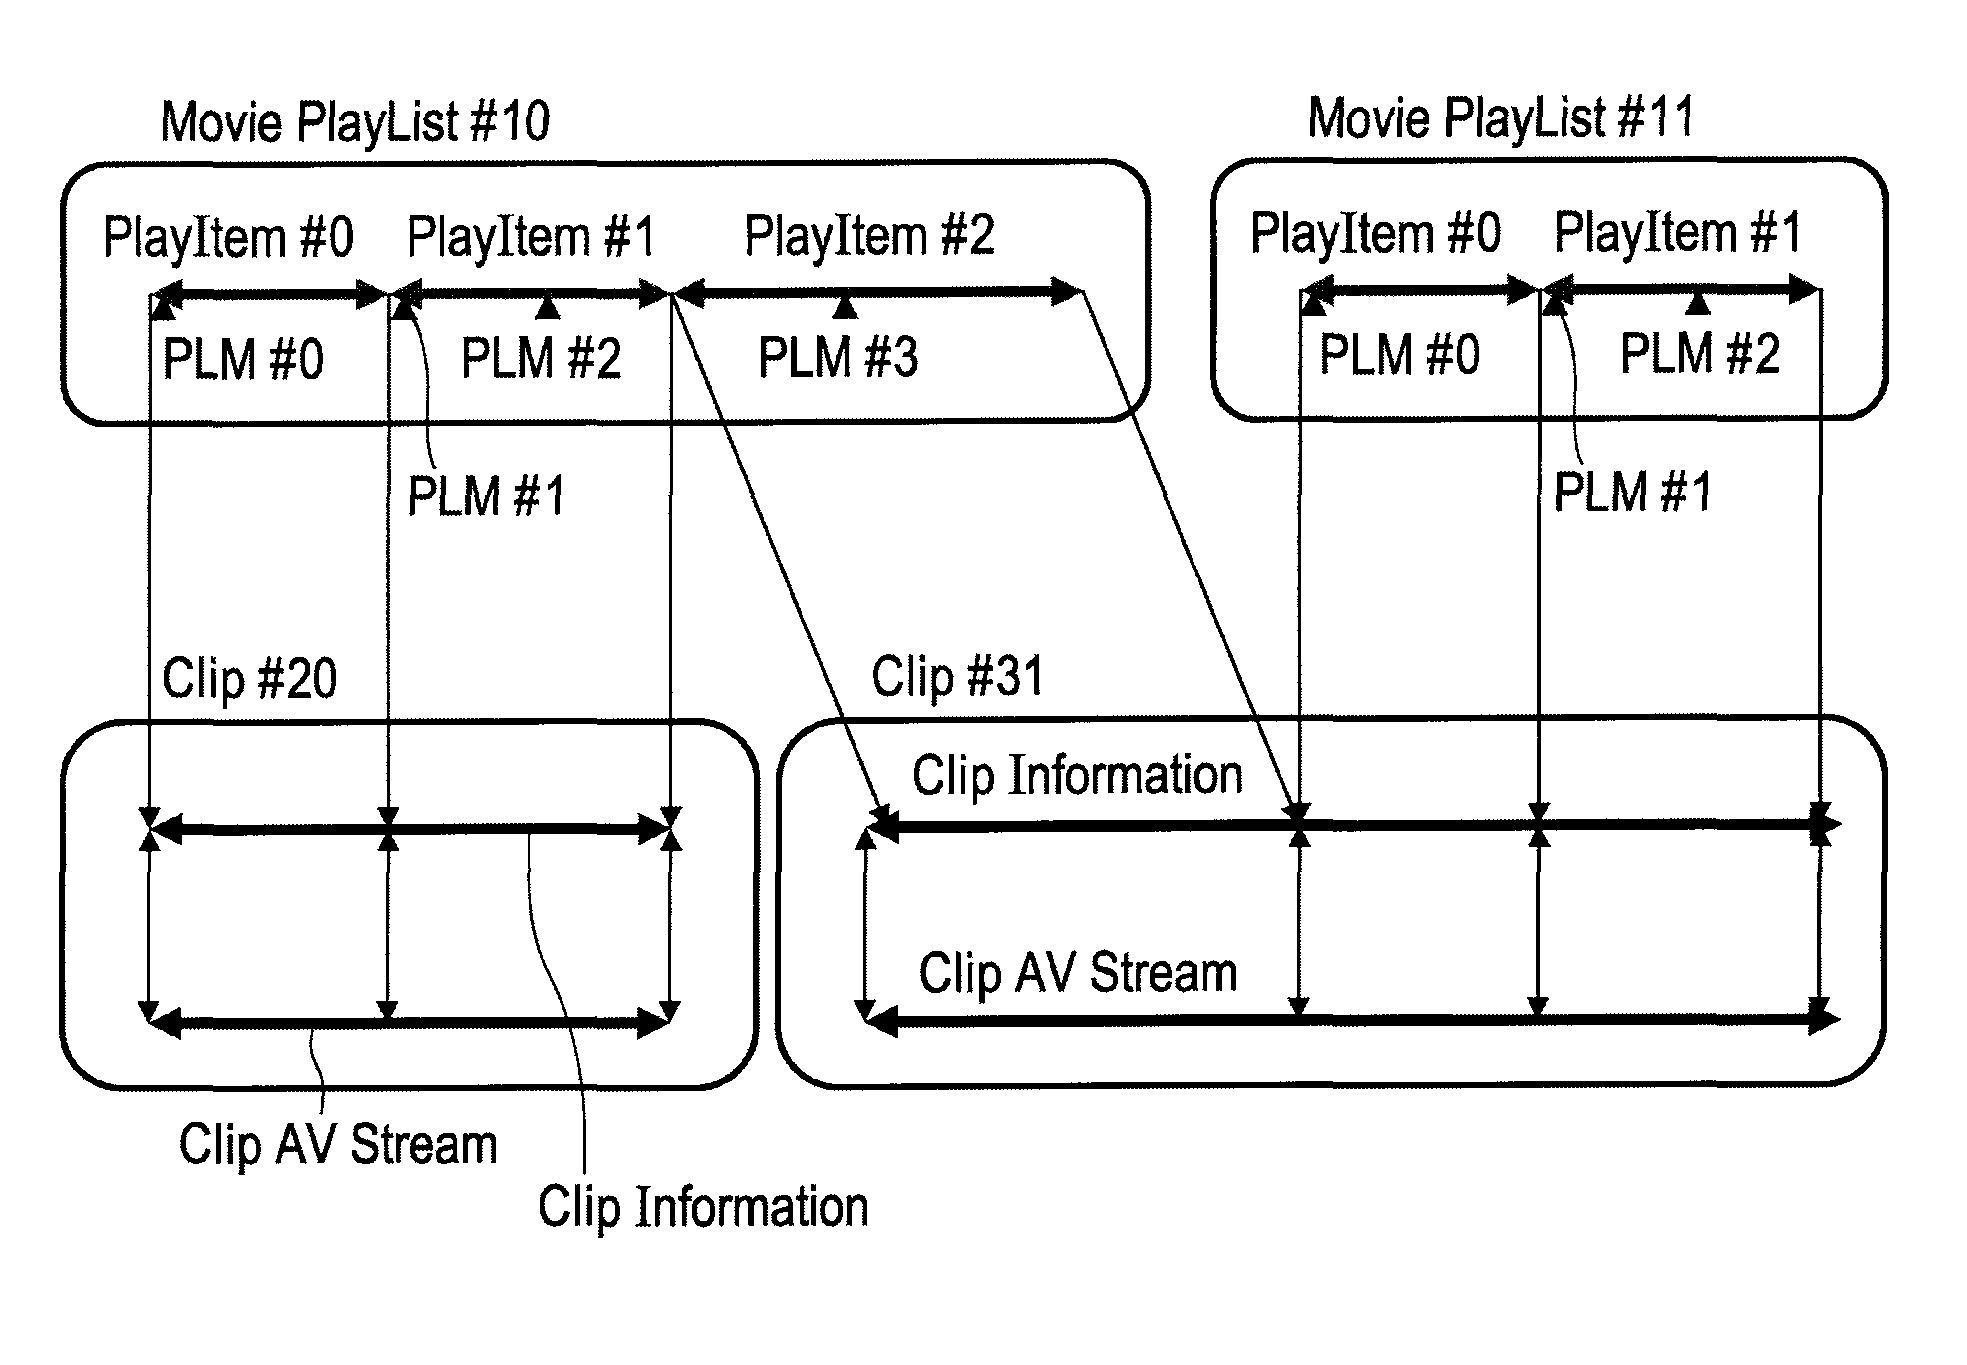 Information processing apparatus, information processing method, and computer program